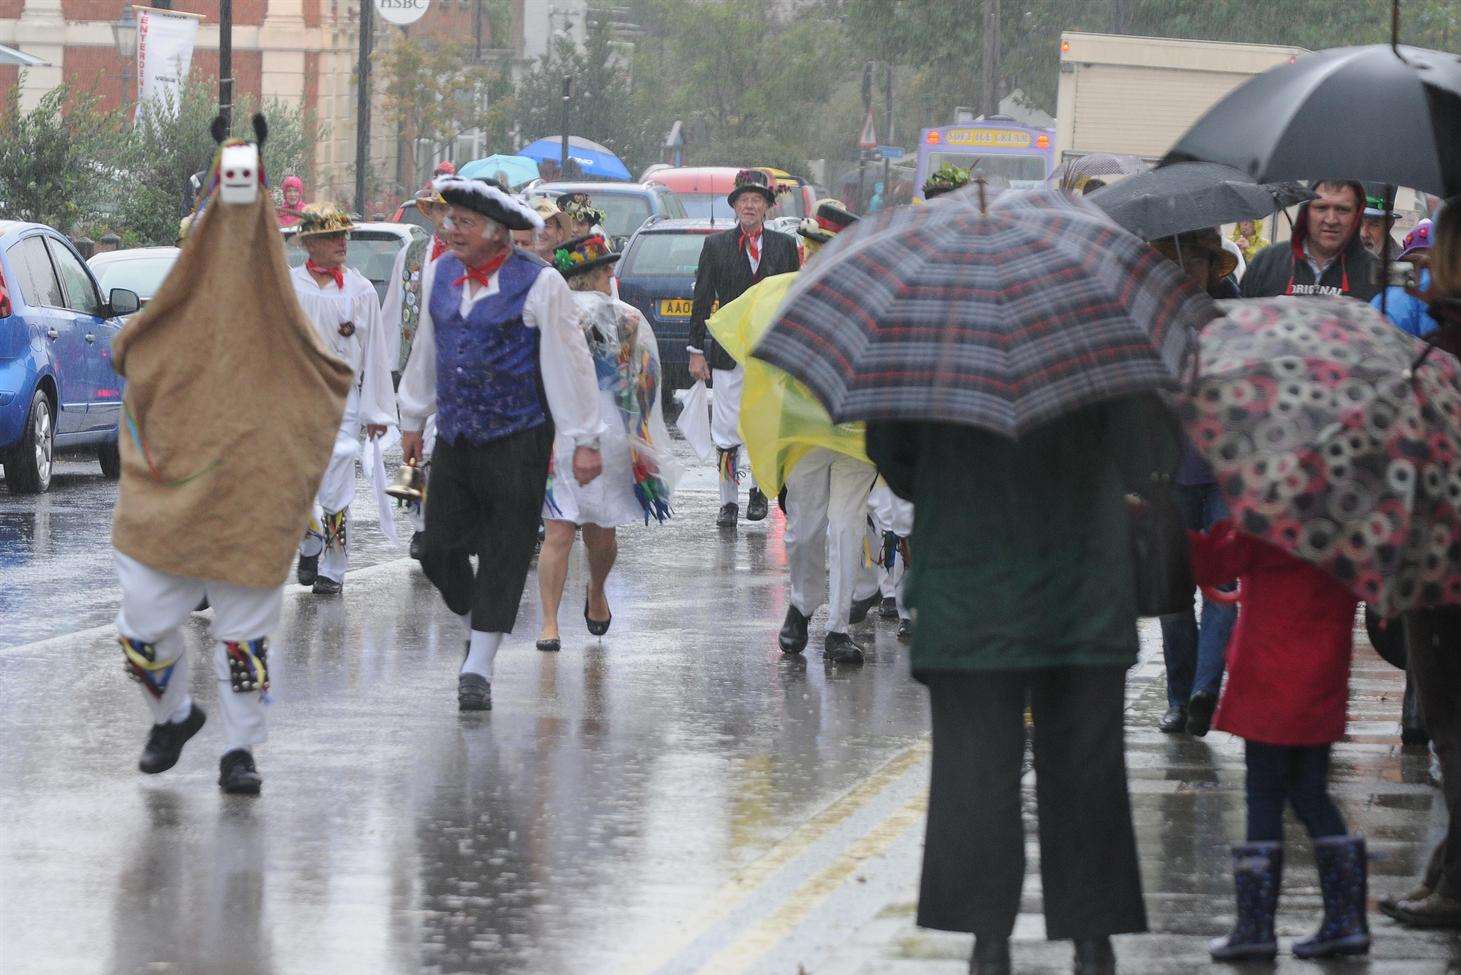 Dancers from Woodchurch Morris Men braved the rain to take part in Tenterden Folk Festival's procession.